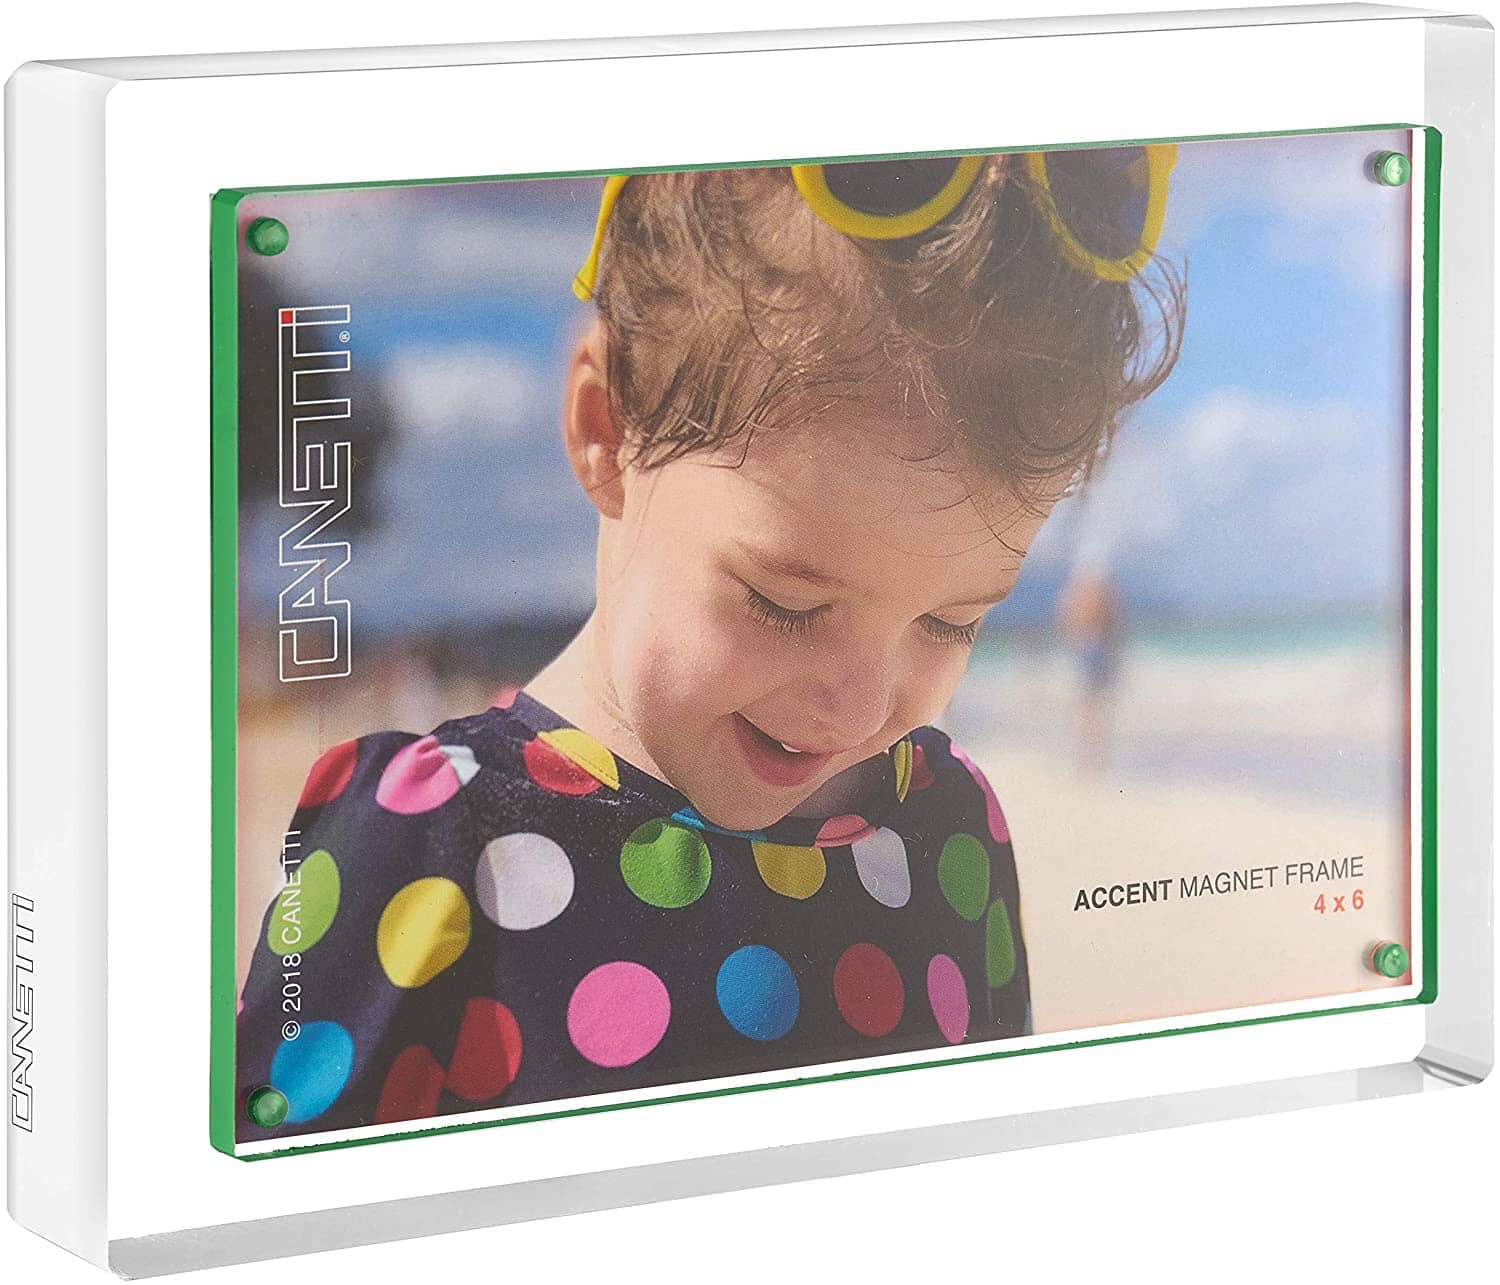 Green Accent Magnet Frame 4x6